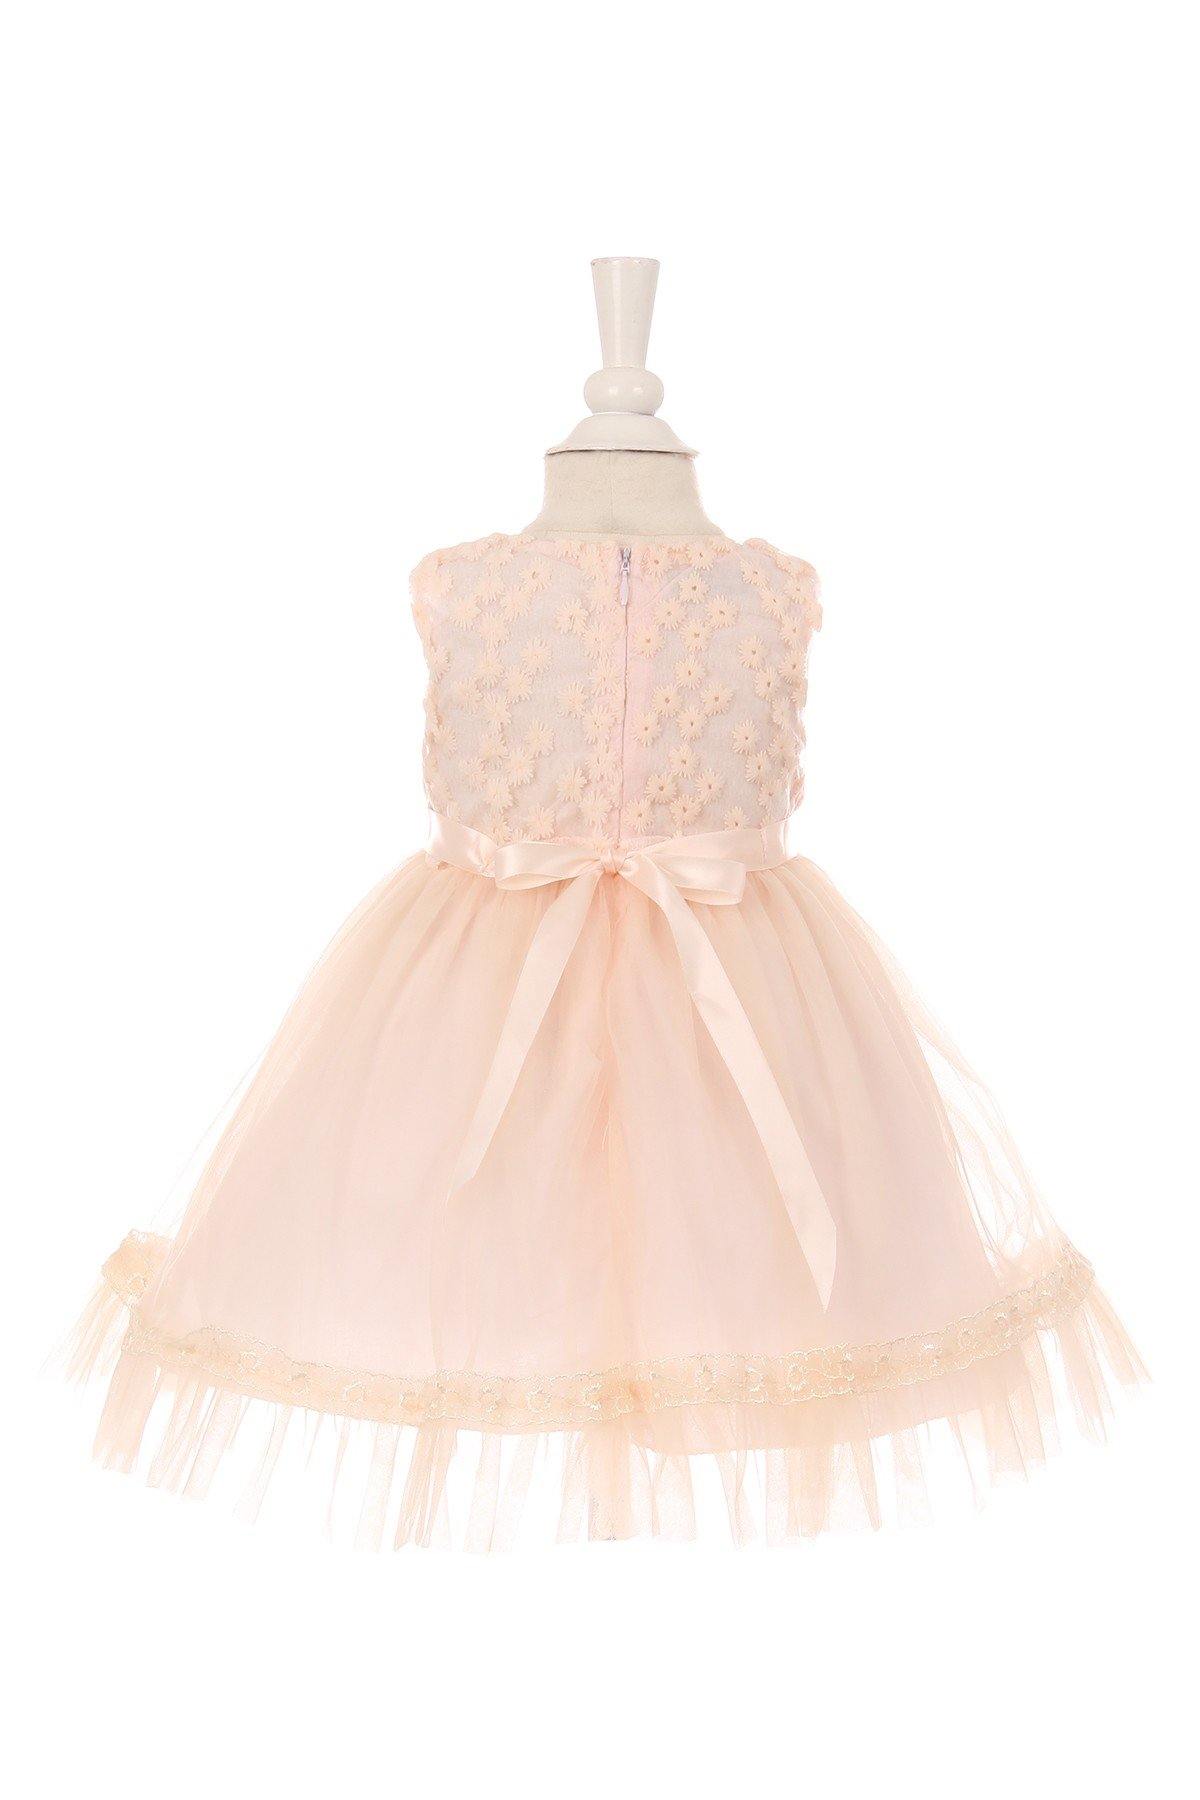 Elegant Sleeveless Lace Baby Dress Flower Girls - The Dress Outlet Cinderella Couture